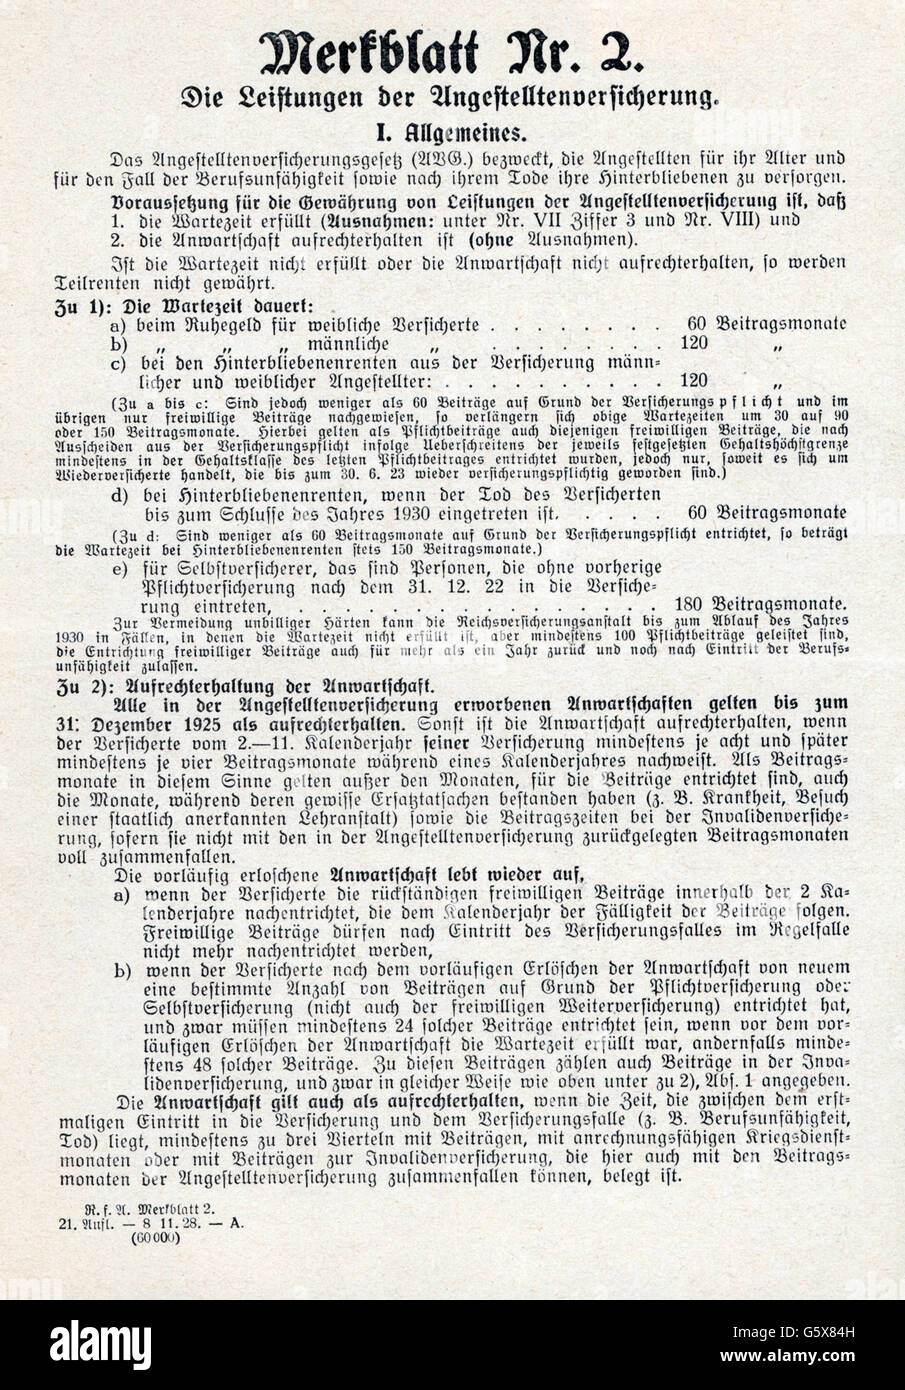 documents,official writing,instructions,instruction number 2,the benefits of the employment insurance,Reich insurance institution for employees,November 1928,page 1,insurances,social security,social insurance,social contribution Carrier,pension insurance fund,pension scheme,pension insurance scheme,retirement insurance,Germany,German Reich,Weimar Republic,1920s,20s,20th century,no-people,documents,document,writing,writings,leaflet,pamphlet,instructions,leaflets,pamphlets,number,numbers,attainment,attainments,employees,office,Additional-Rights-Clearences-Not Available Stock Photo